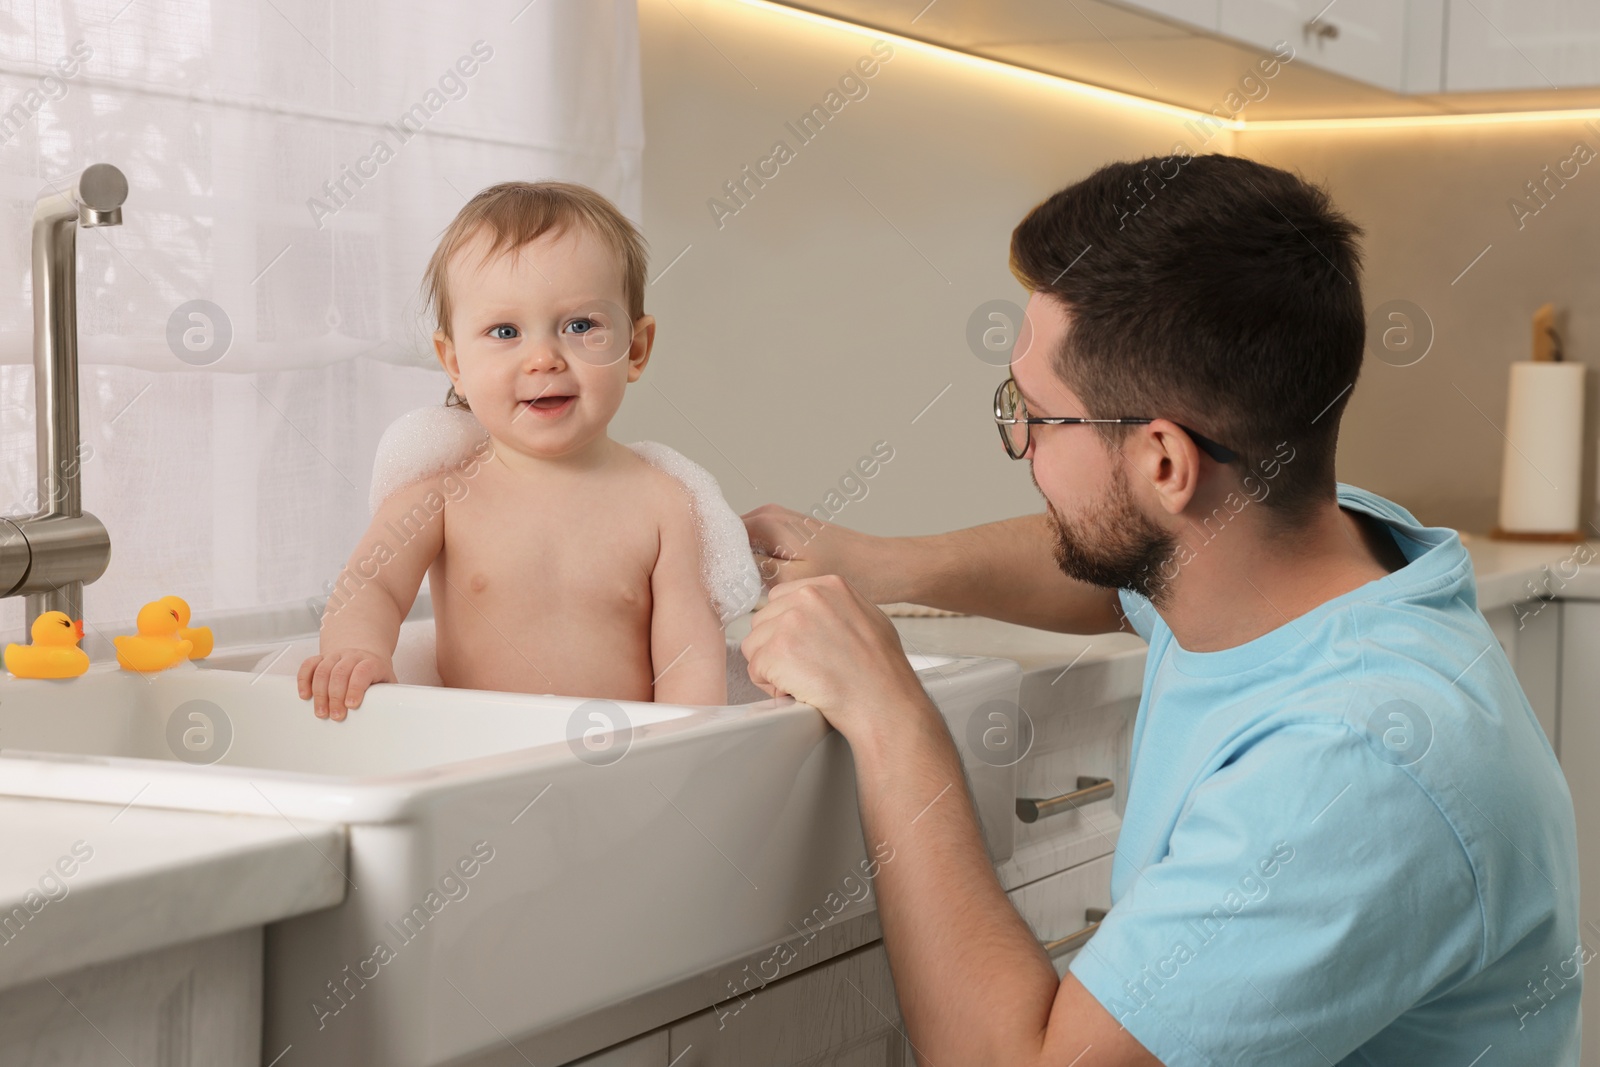 Photo of Father washing his little baby in sink at home